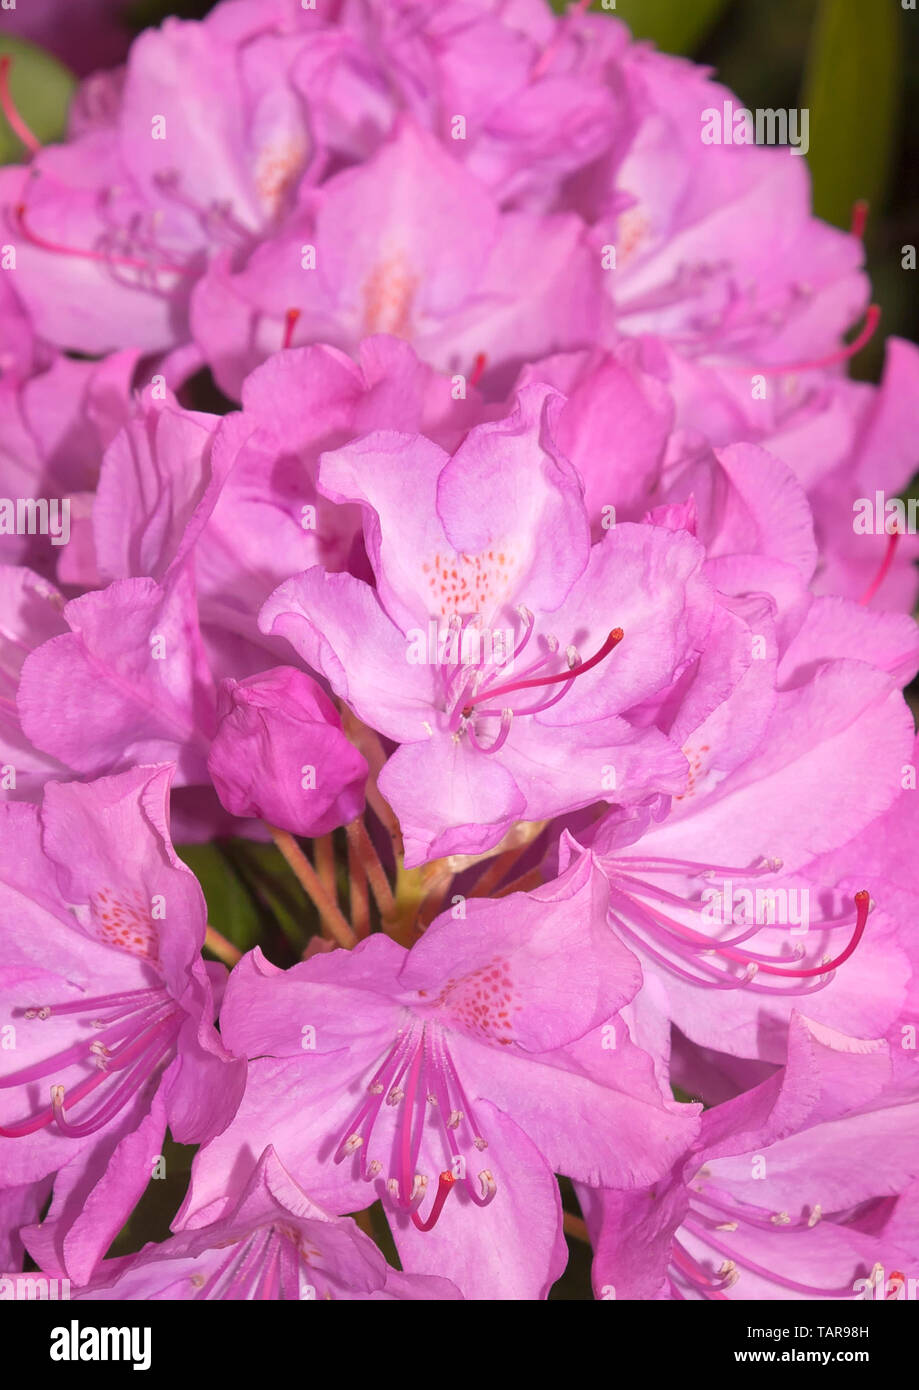 Flowers of a rhododendron Stock Photo